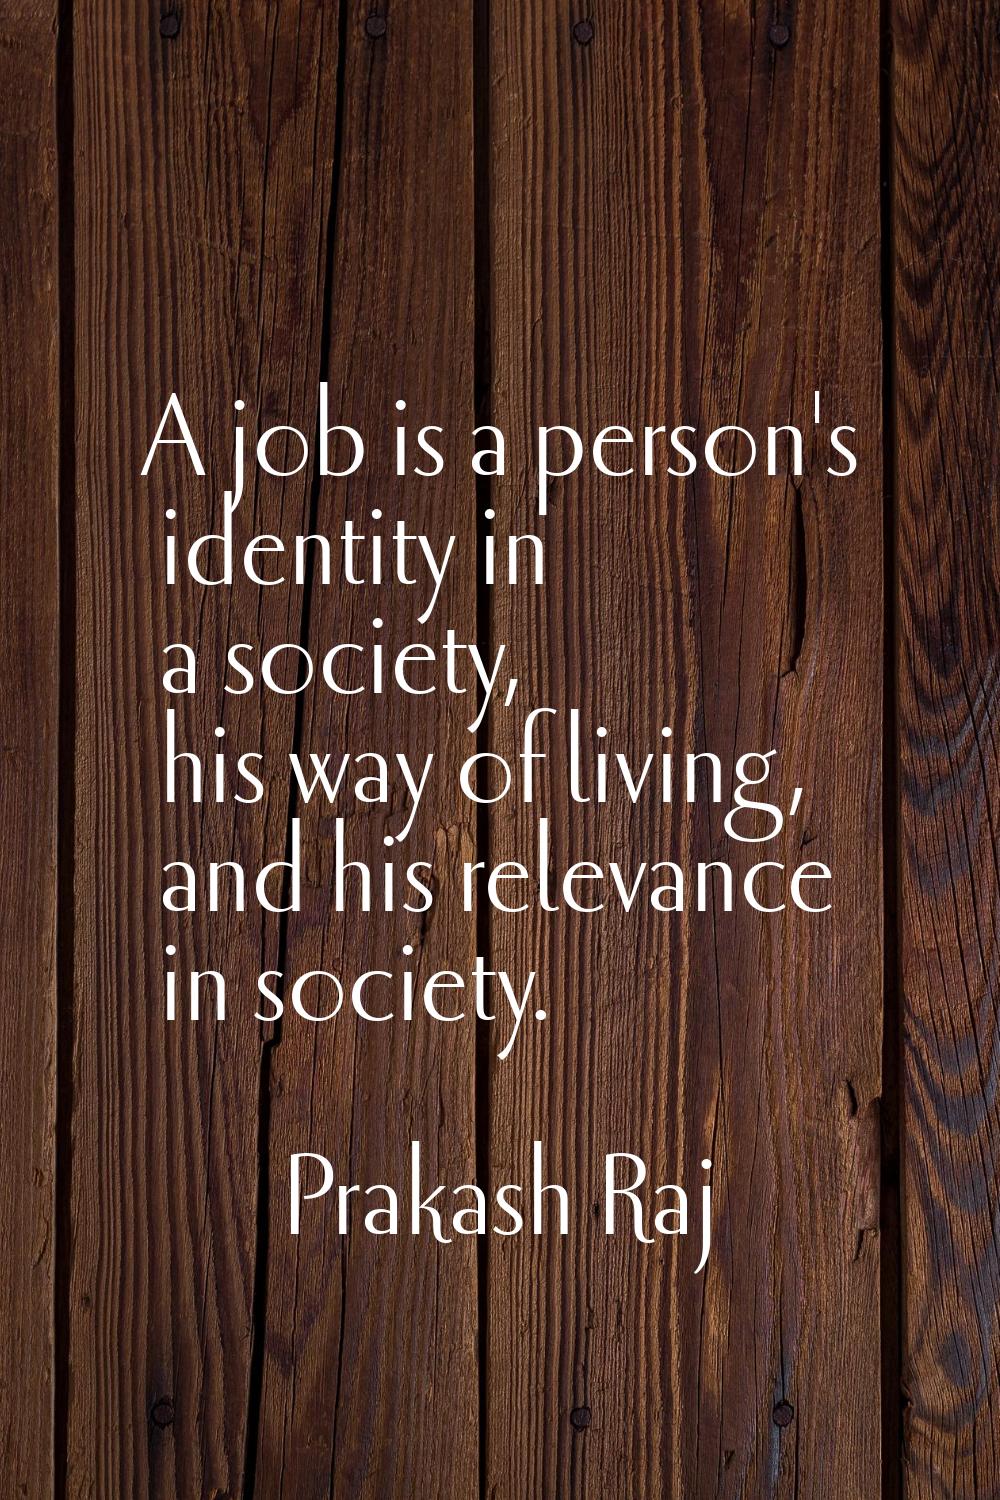 A job is a person's identity in a society, his way of living, and his relevance in society.